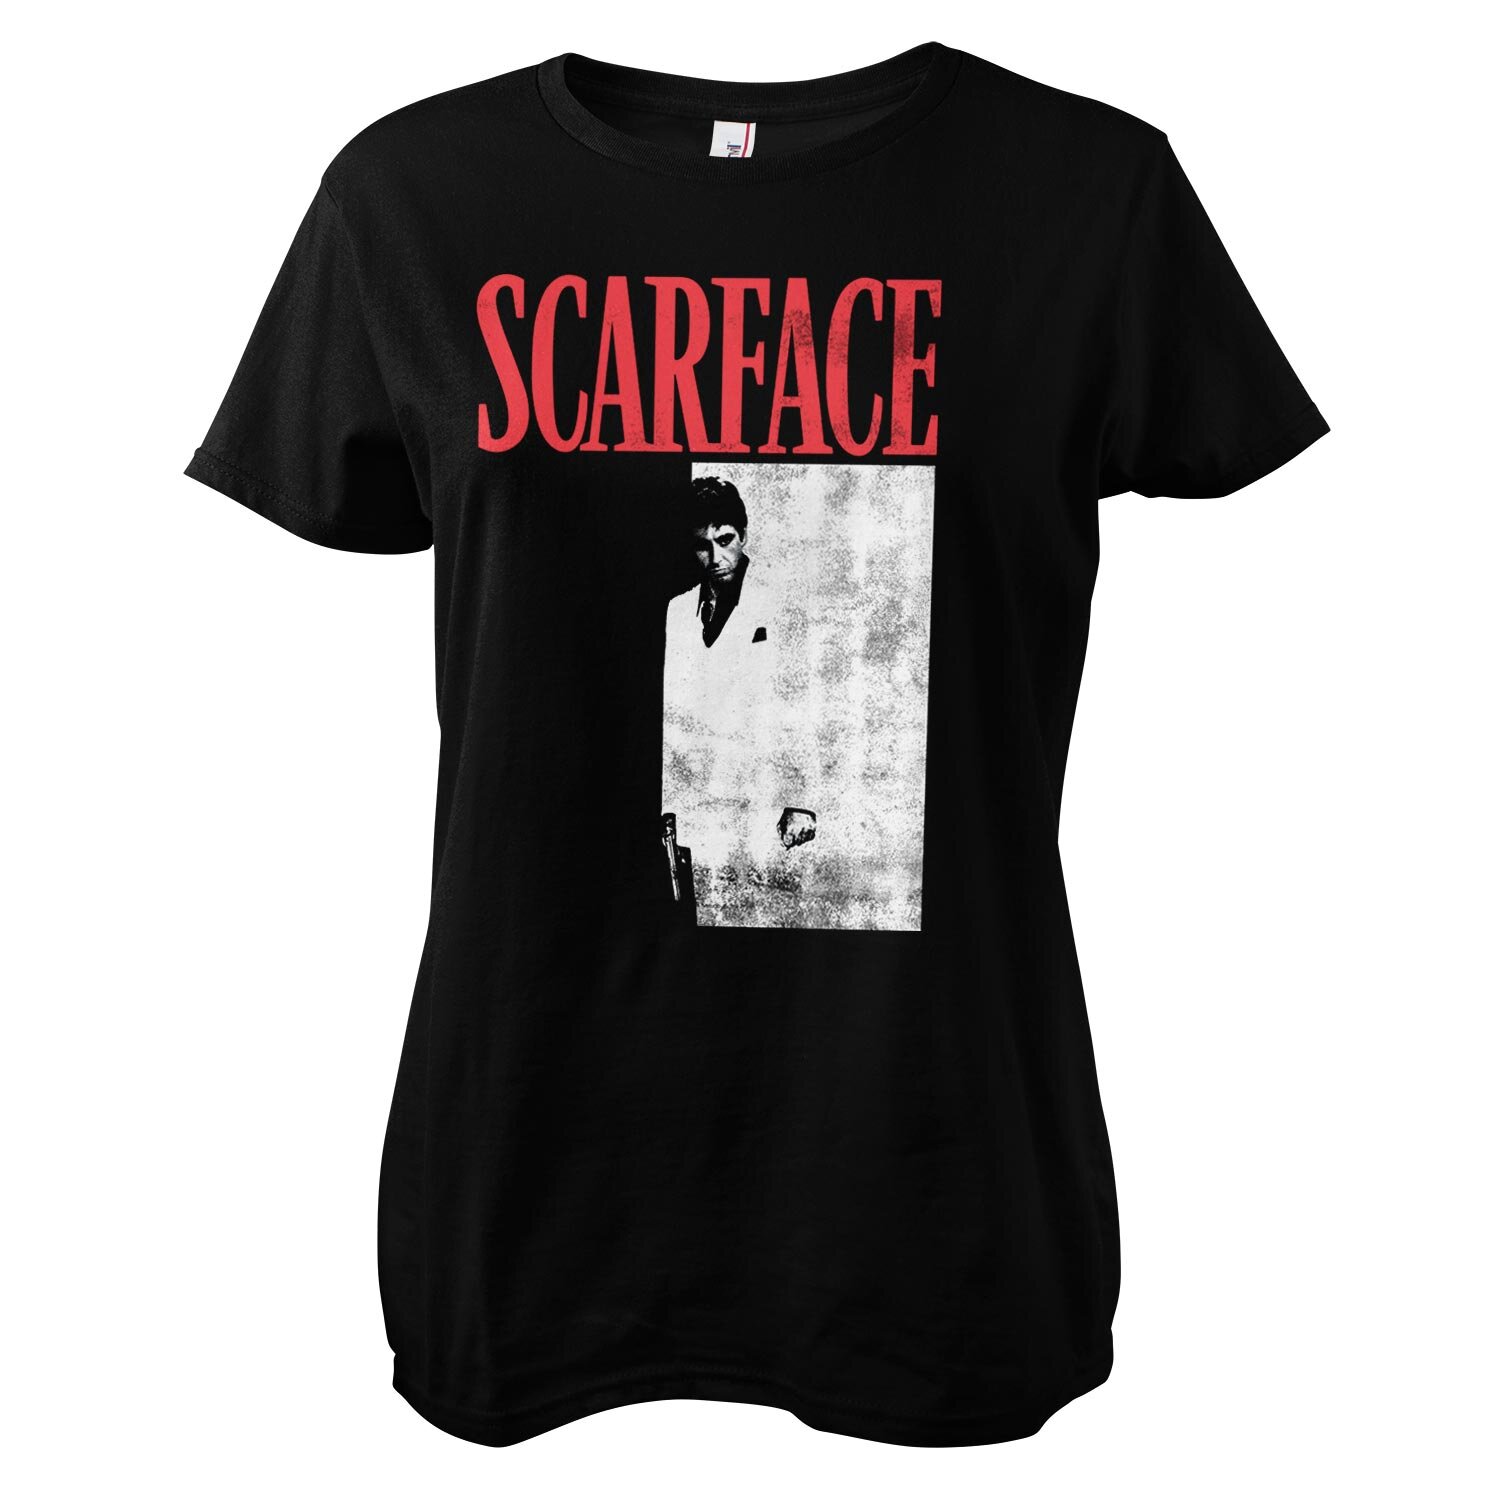 Scarface Poster Girly Tee